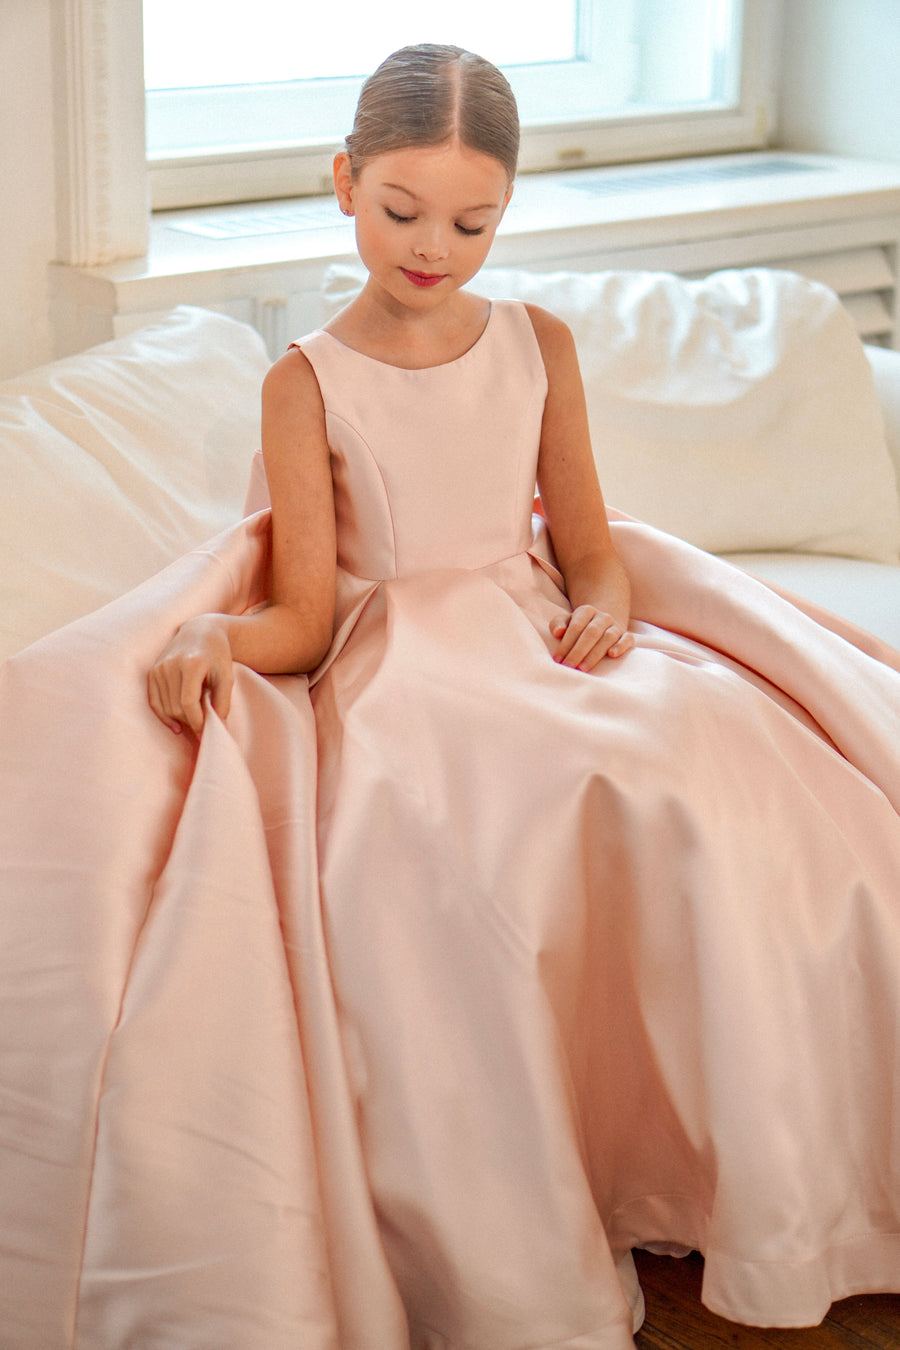 Sophia Mikado Special Occasion Girl Dress (Made to order)